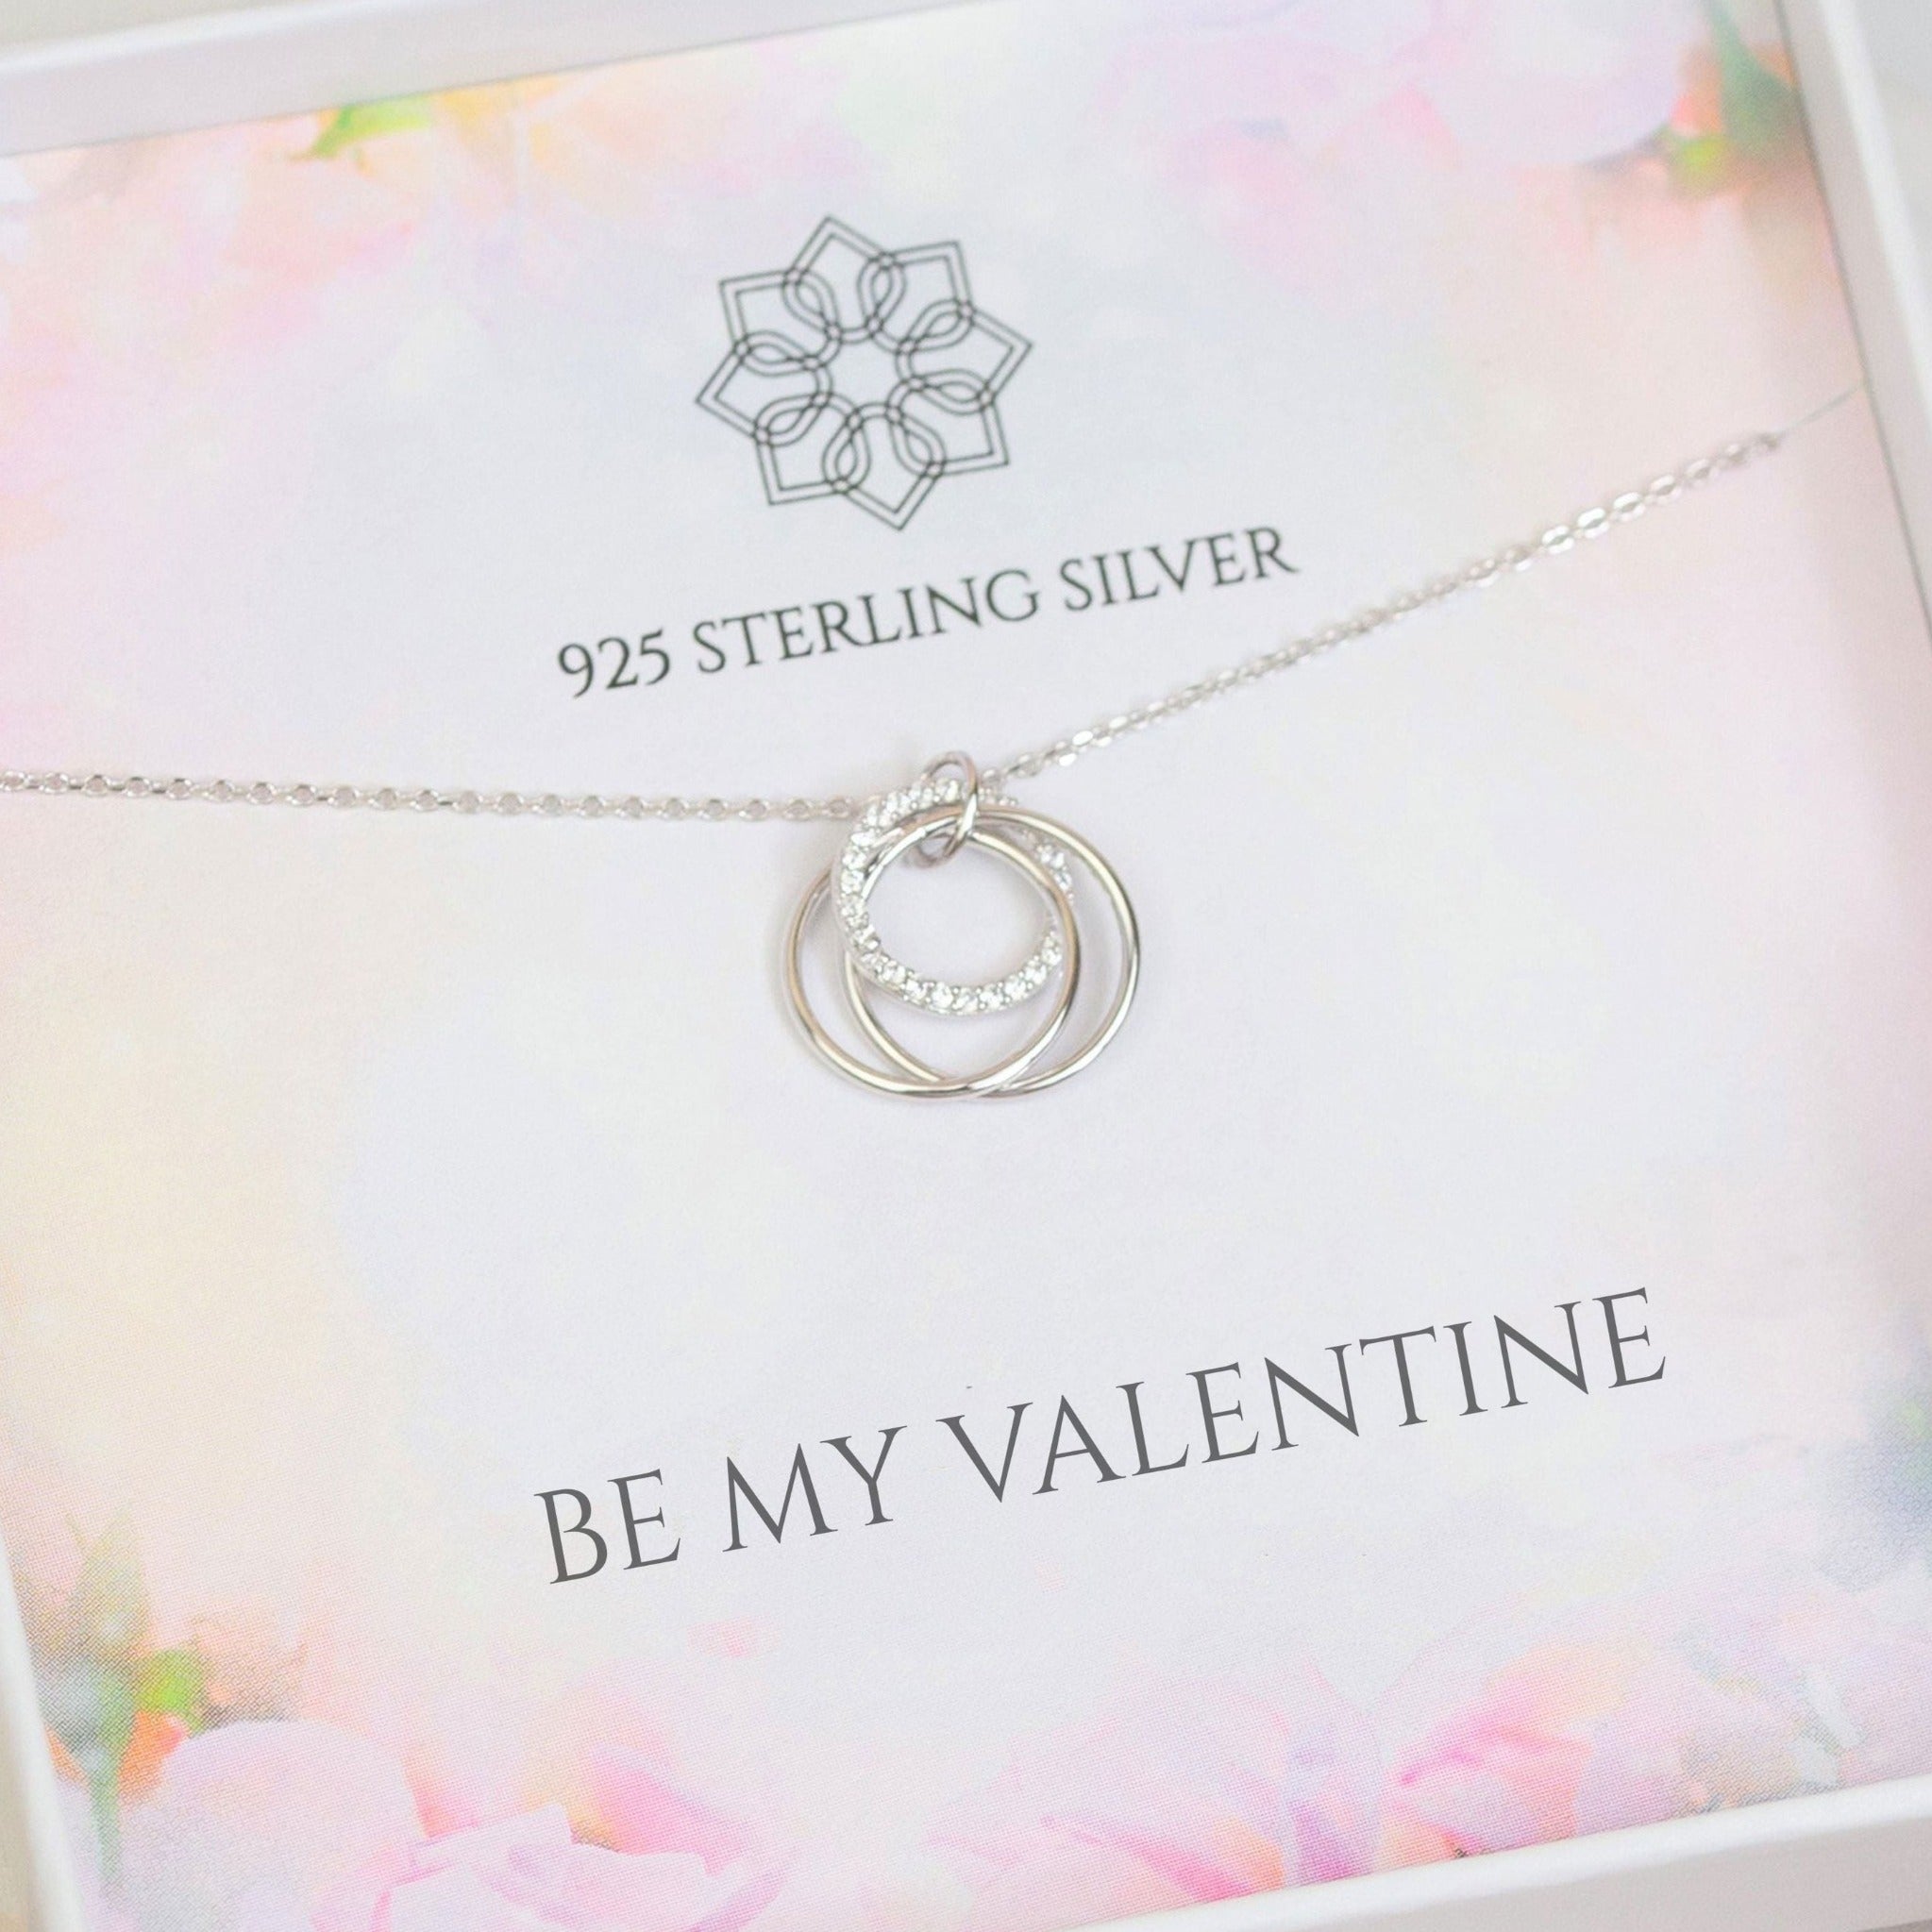 Be My Valentine Necklace Gift